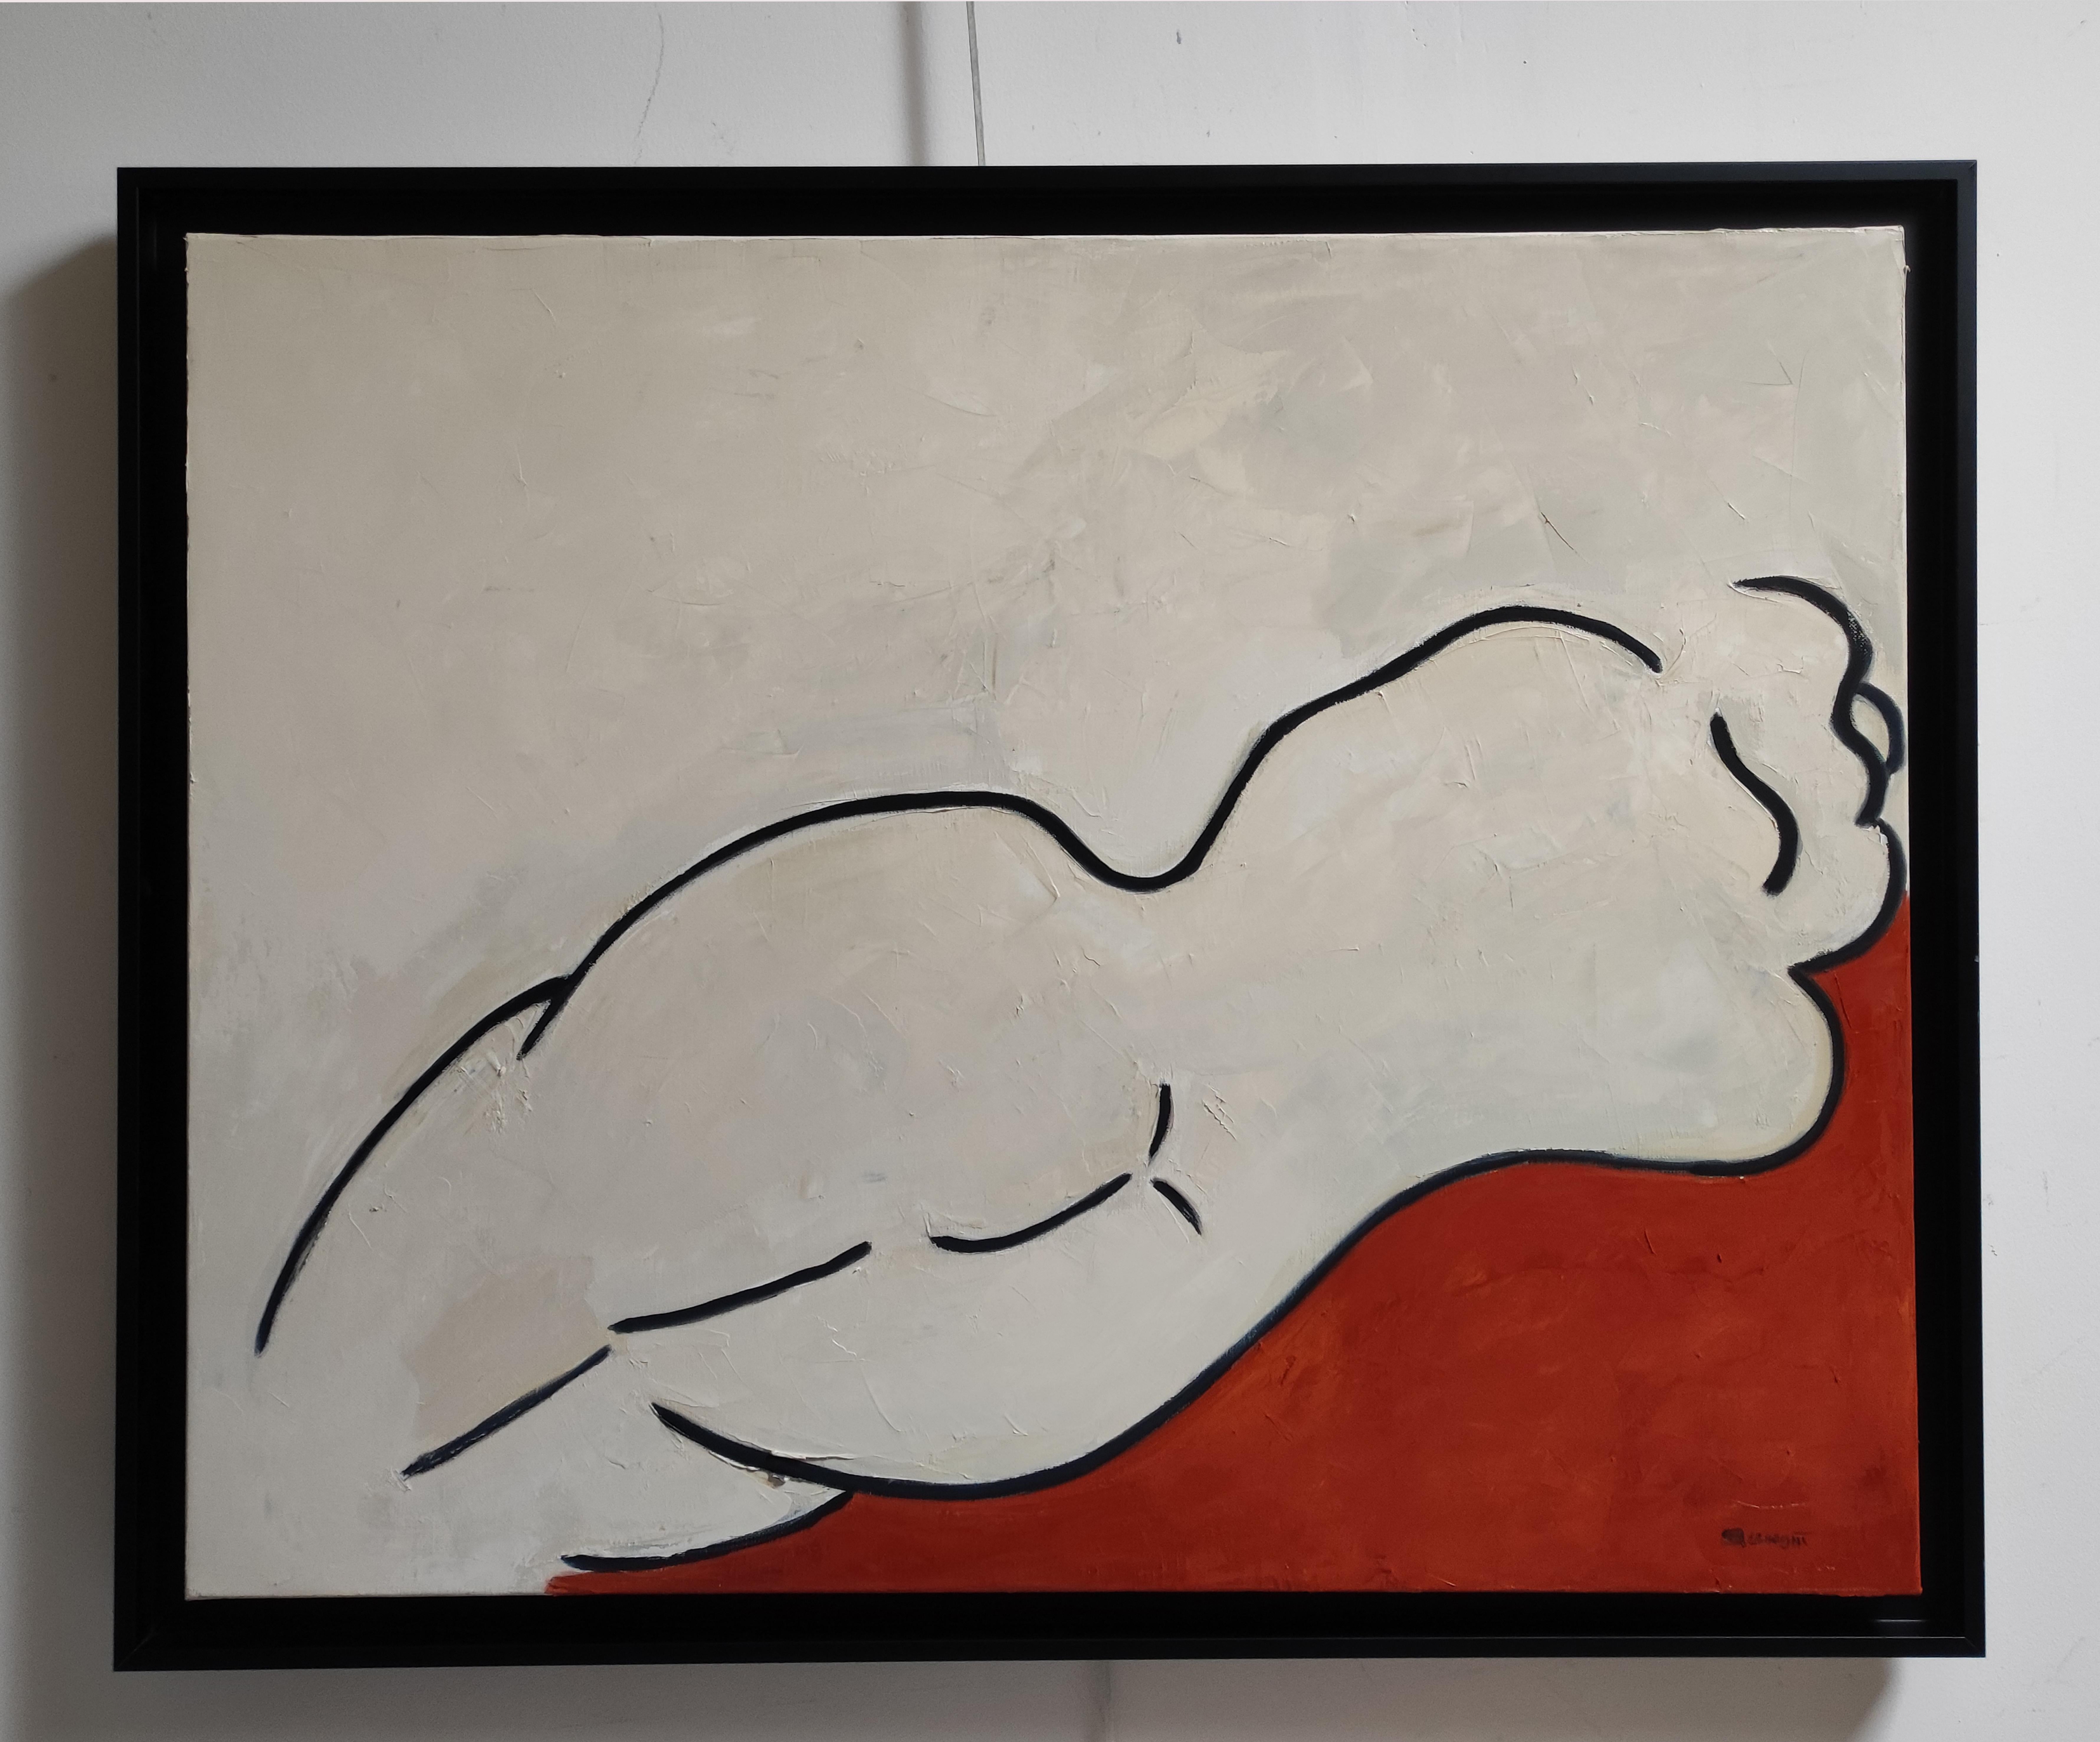 Courbes, nude woman, figurative modern, oil on canvas, contemporary, minimalism - Painting by SOPHIE DUMONT